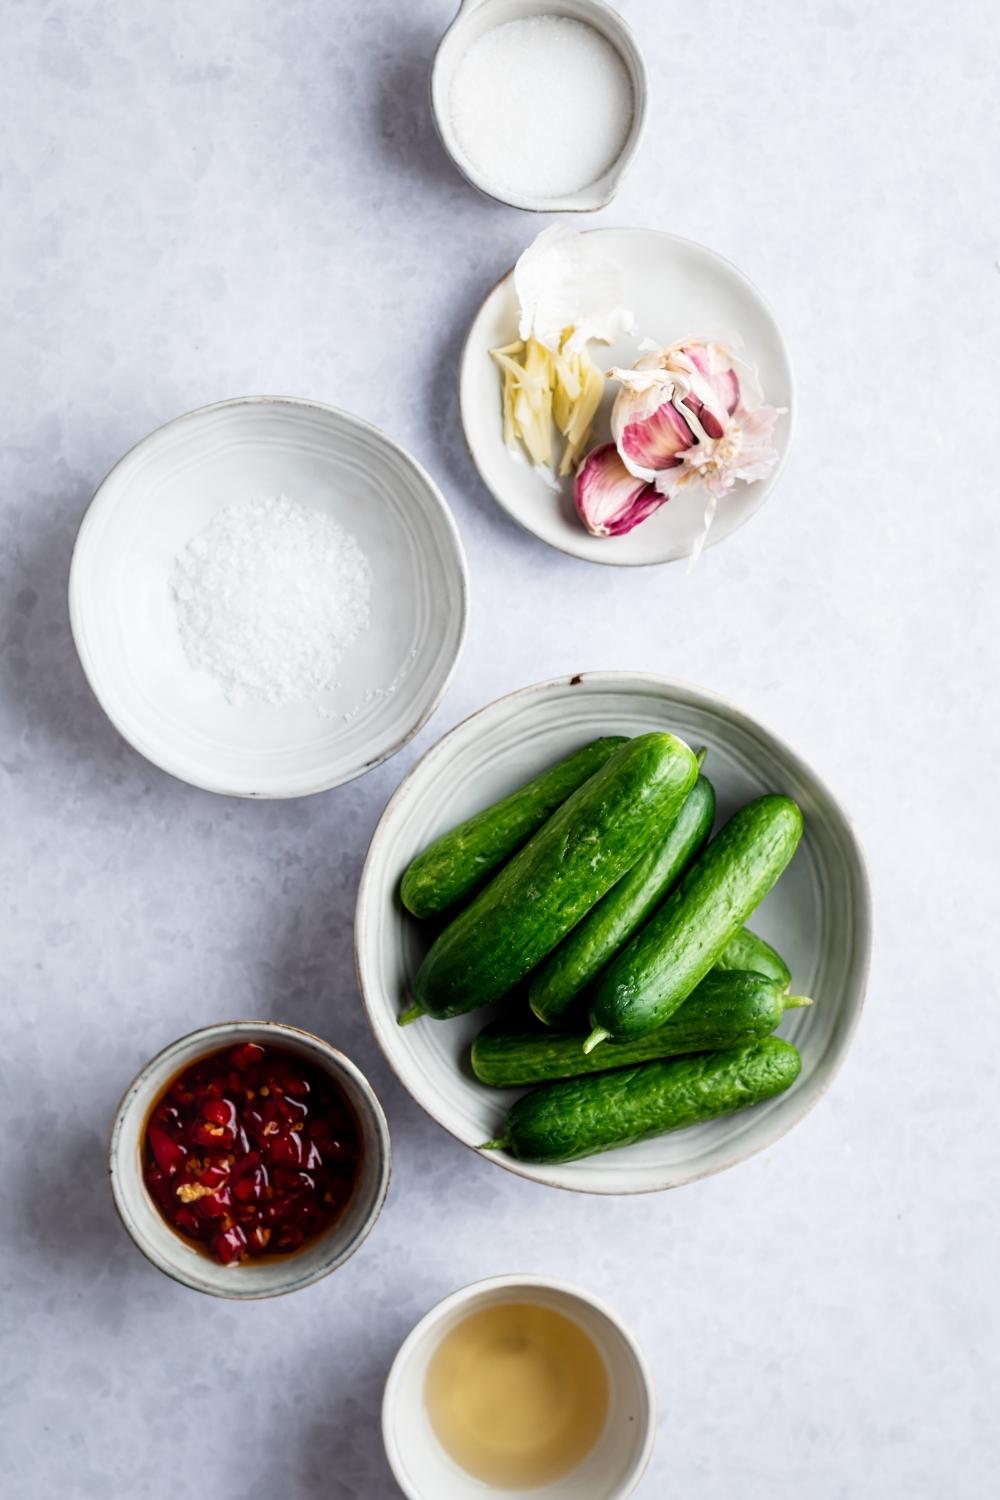 Cucumbers in a bowl, chili peppers in a bowl, salt in bowl, and garlic on a plate all on a white counter.